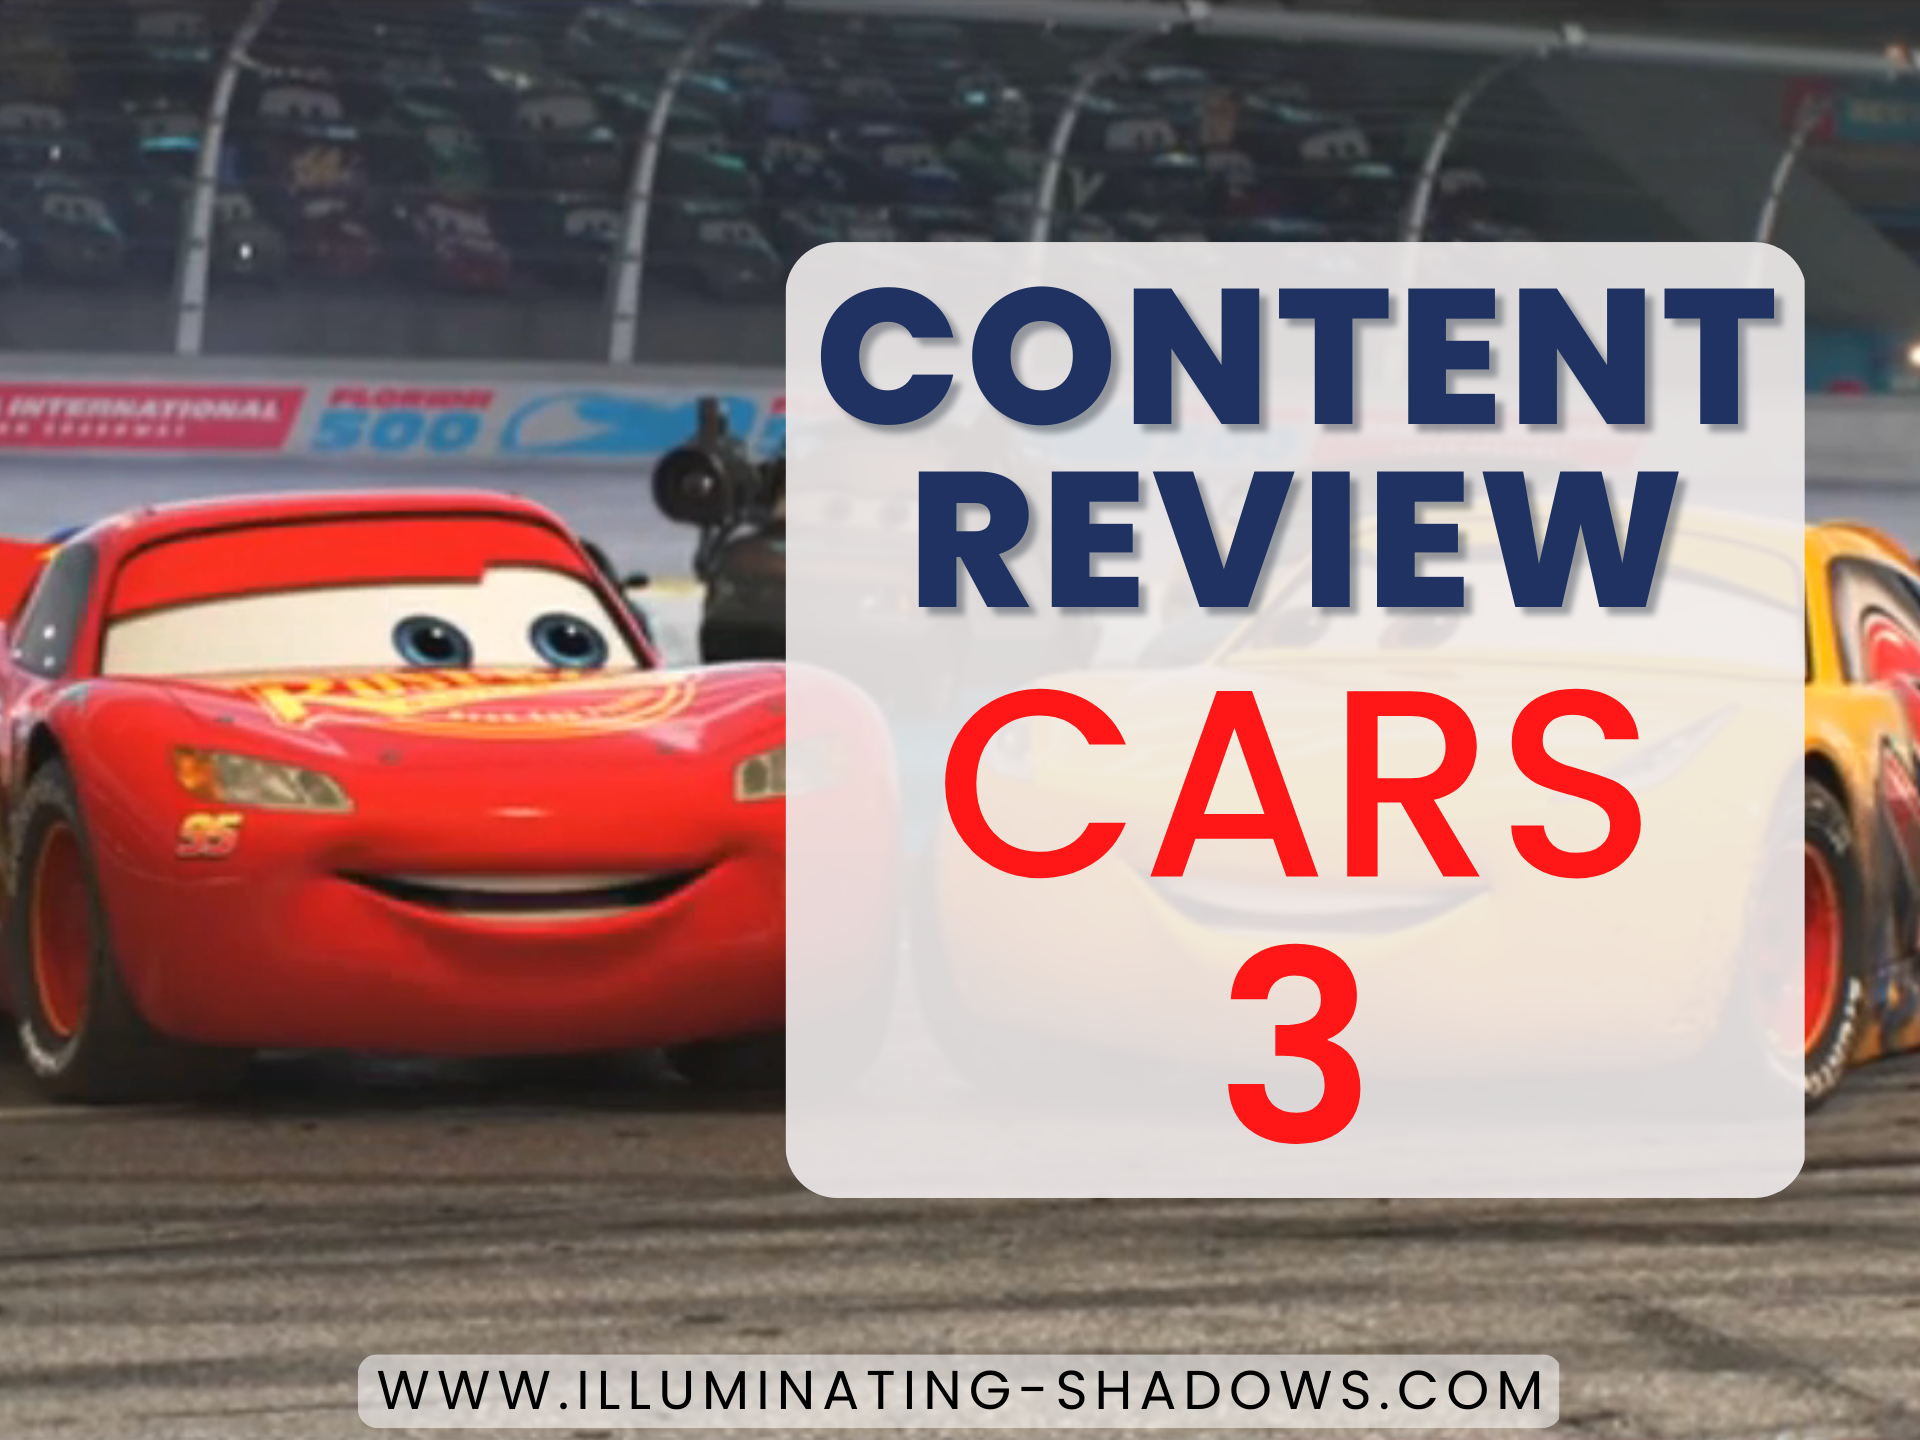 Cars 3 - Content Review - Picture of Lightning McQueen and Cruz